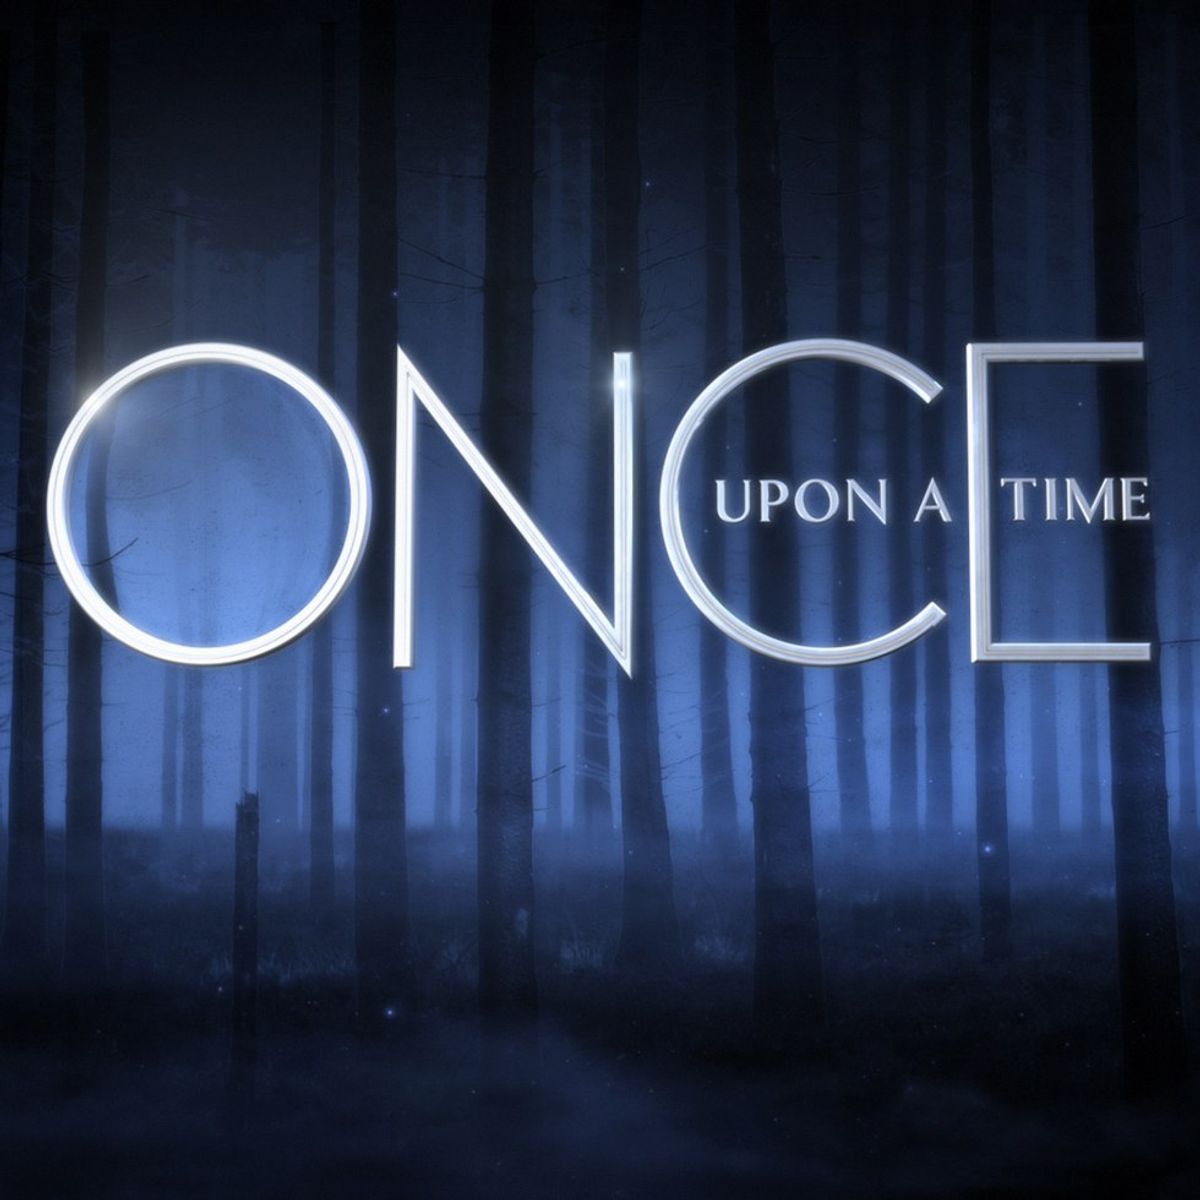 How 'Once Upon A Time' Messes With Fairytale Norms (In A Good Way)